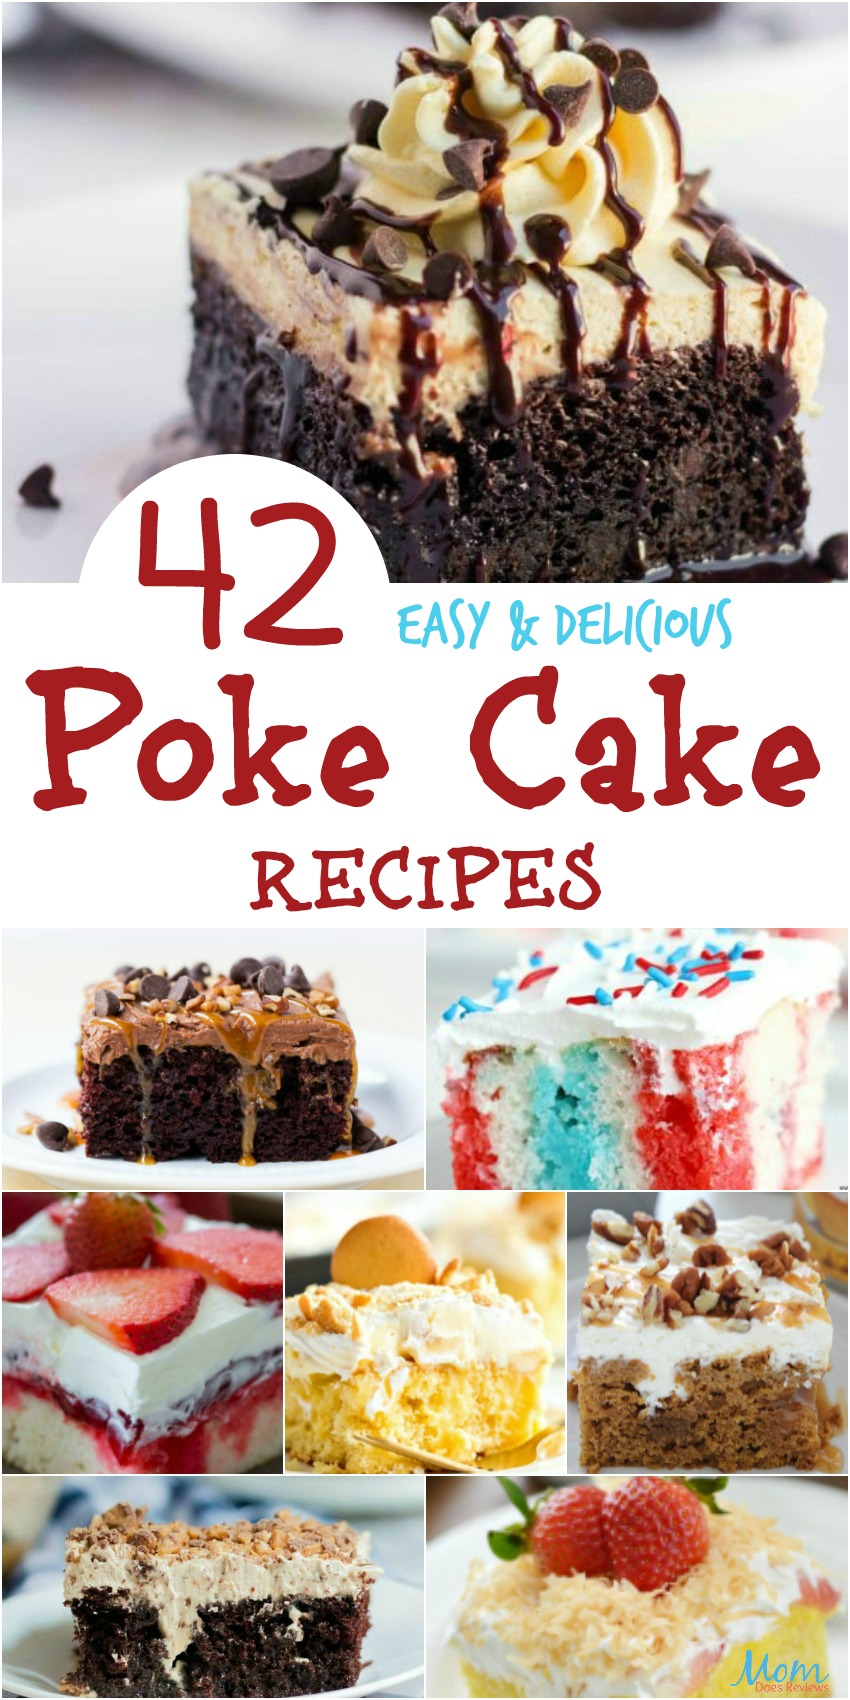 42 Easy & Delicious Poke Cake Recipes Your Family Will Love #recipes #cakes #getinmybelly #desserts #sweets #foodie